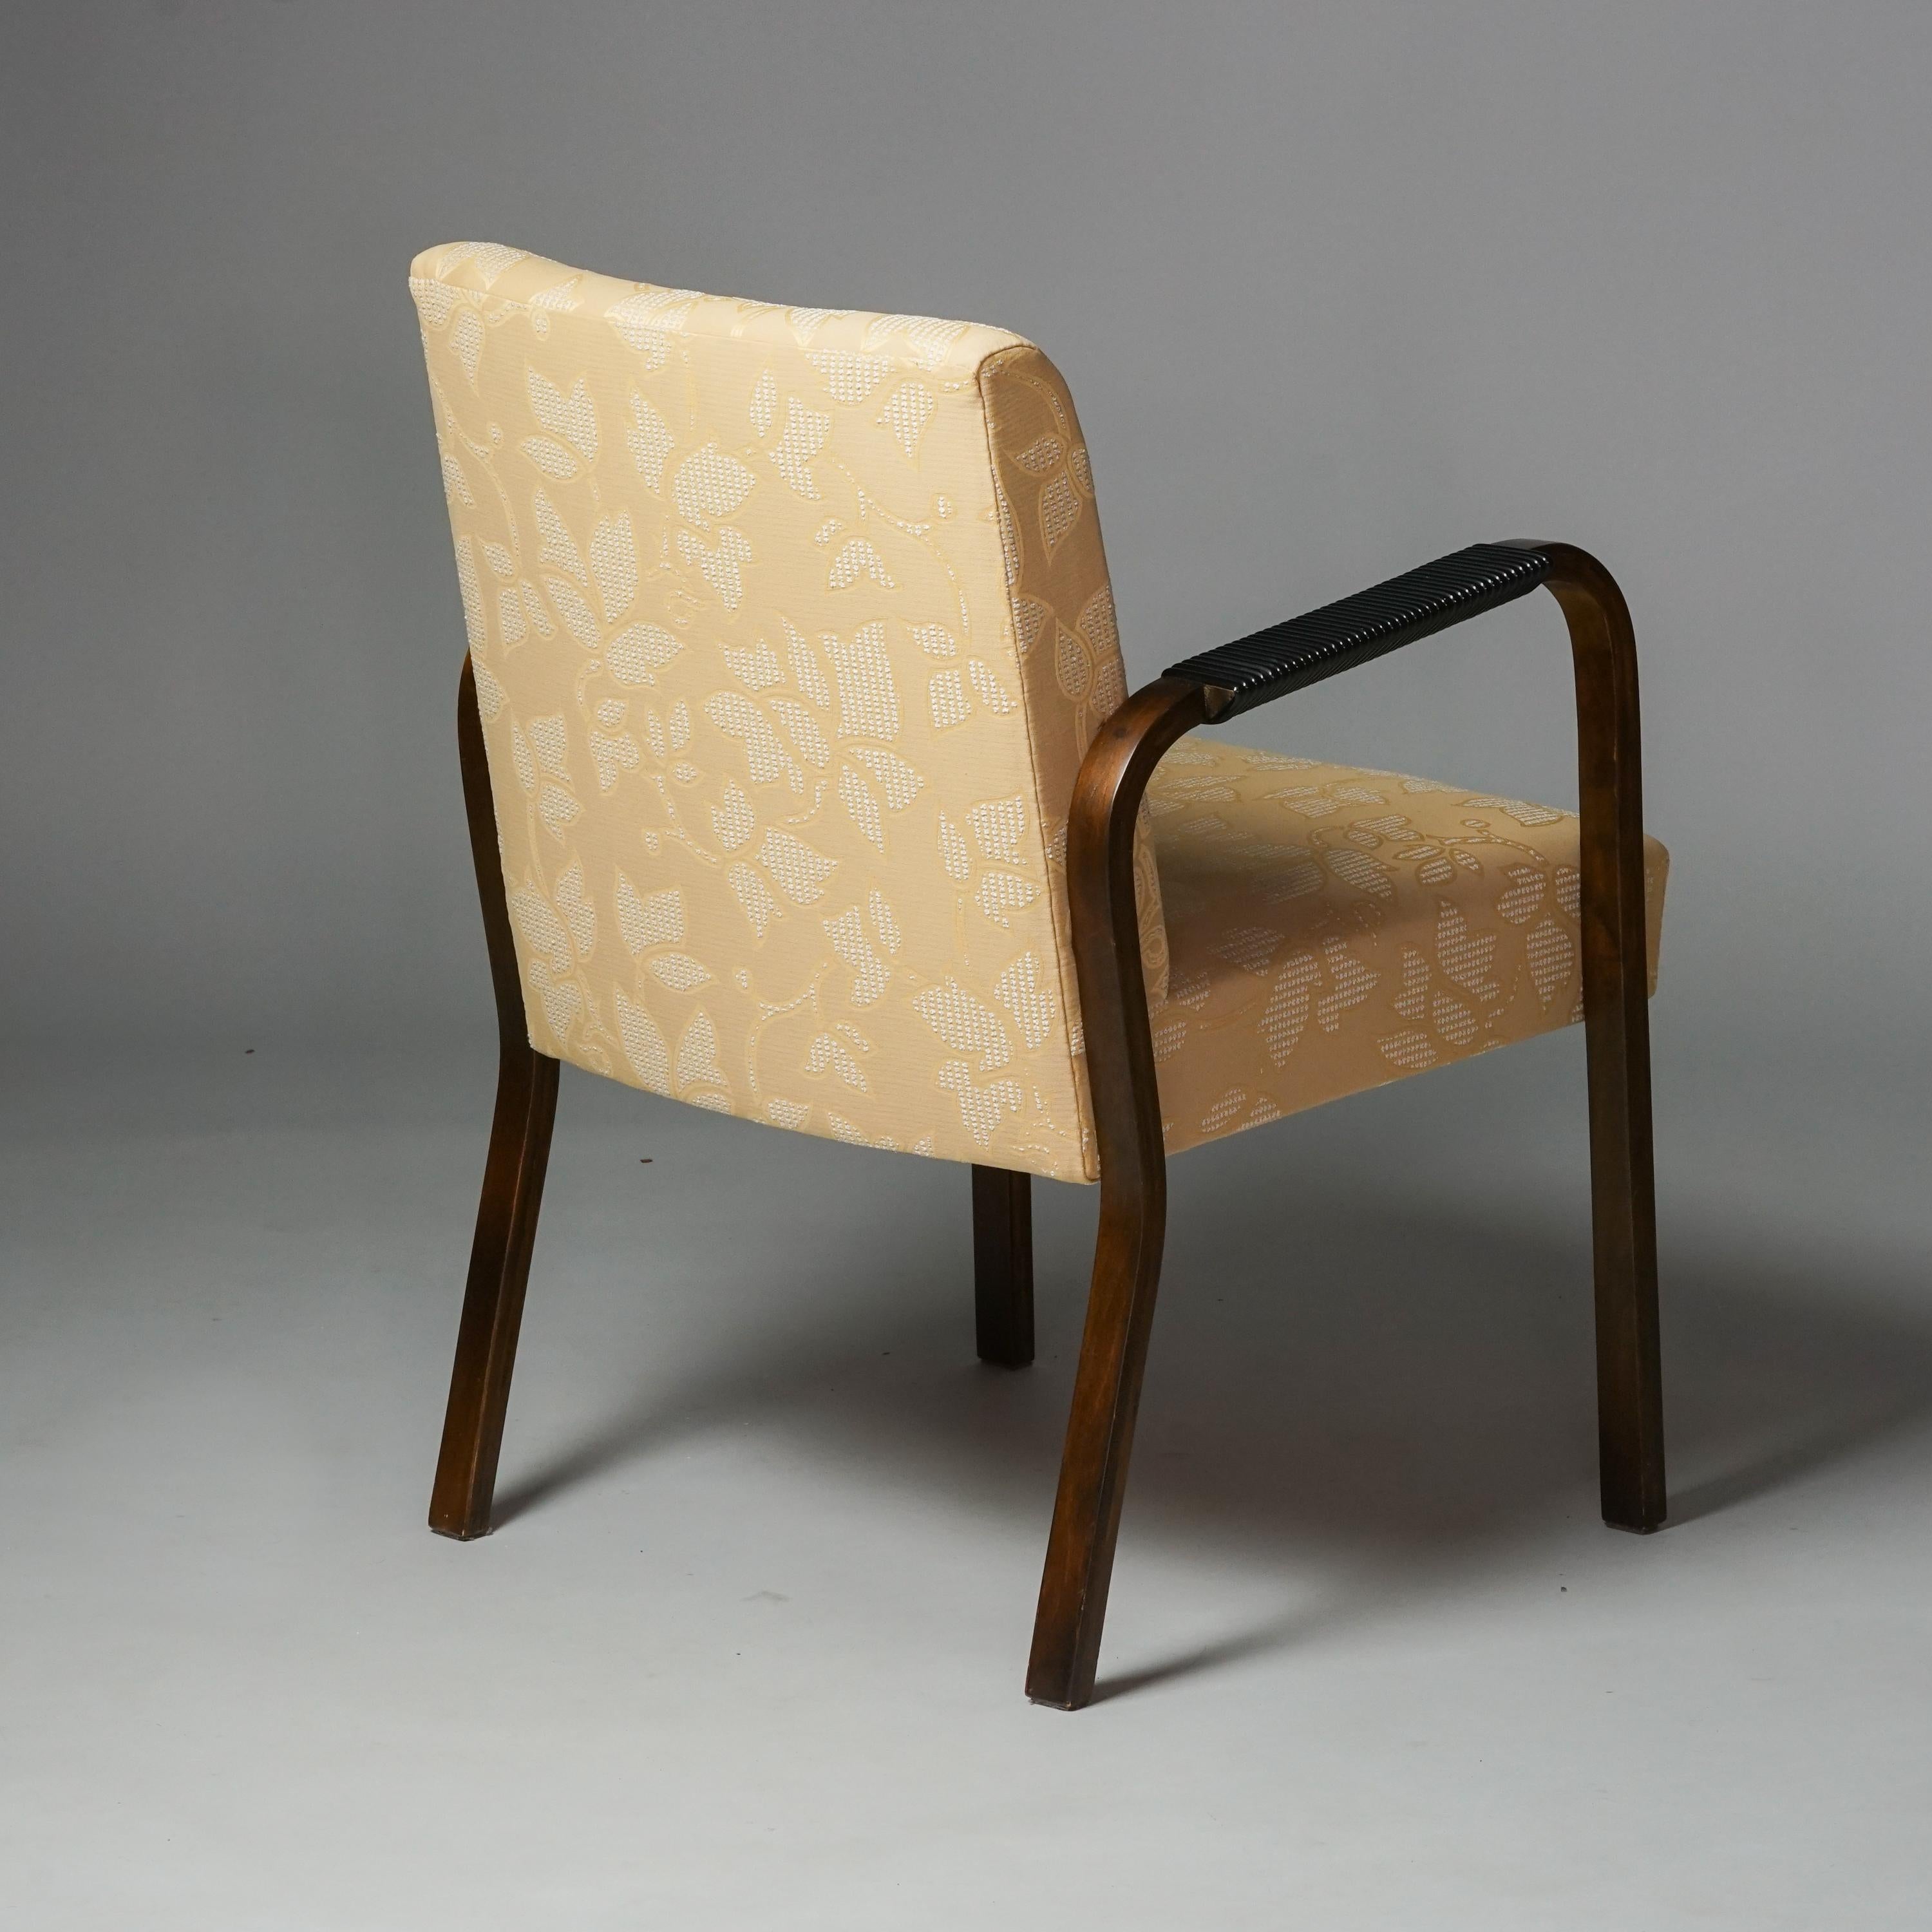 Model 46 armchair, designed by Alvar Aalto, 1930/1940s. Stained birch frame with kerni wrapped handles. Later reupholstered with quality fabric. Good vintage condition, minor patina consistent with age and use. 

Alvar Aalto (1898-1976) is probably